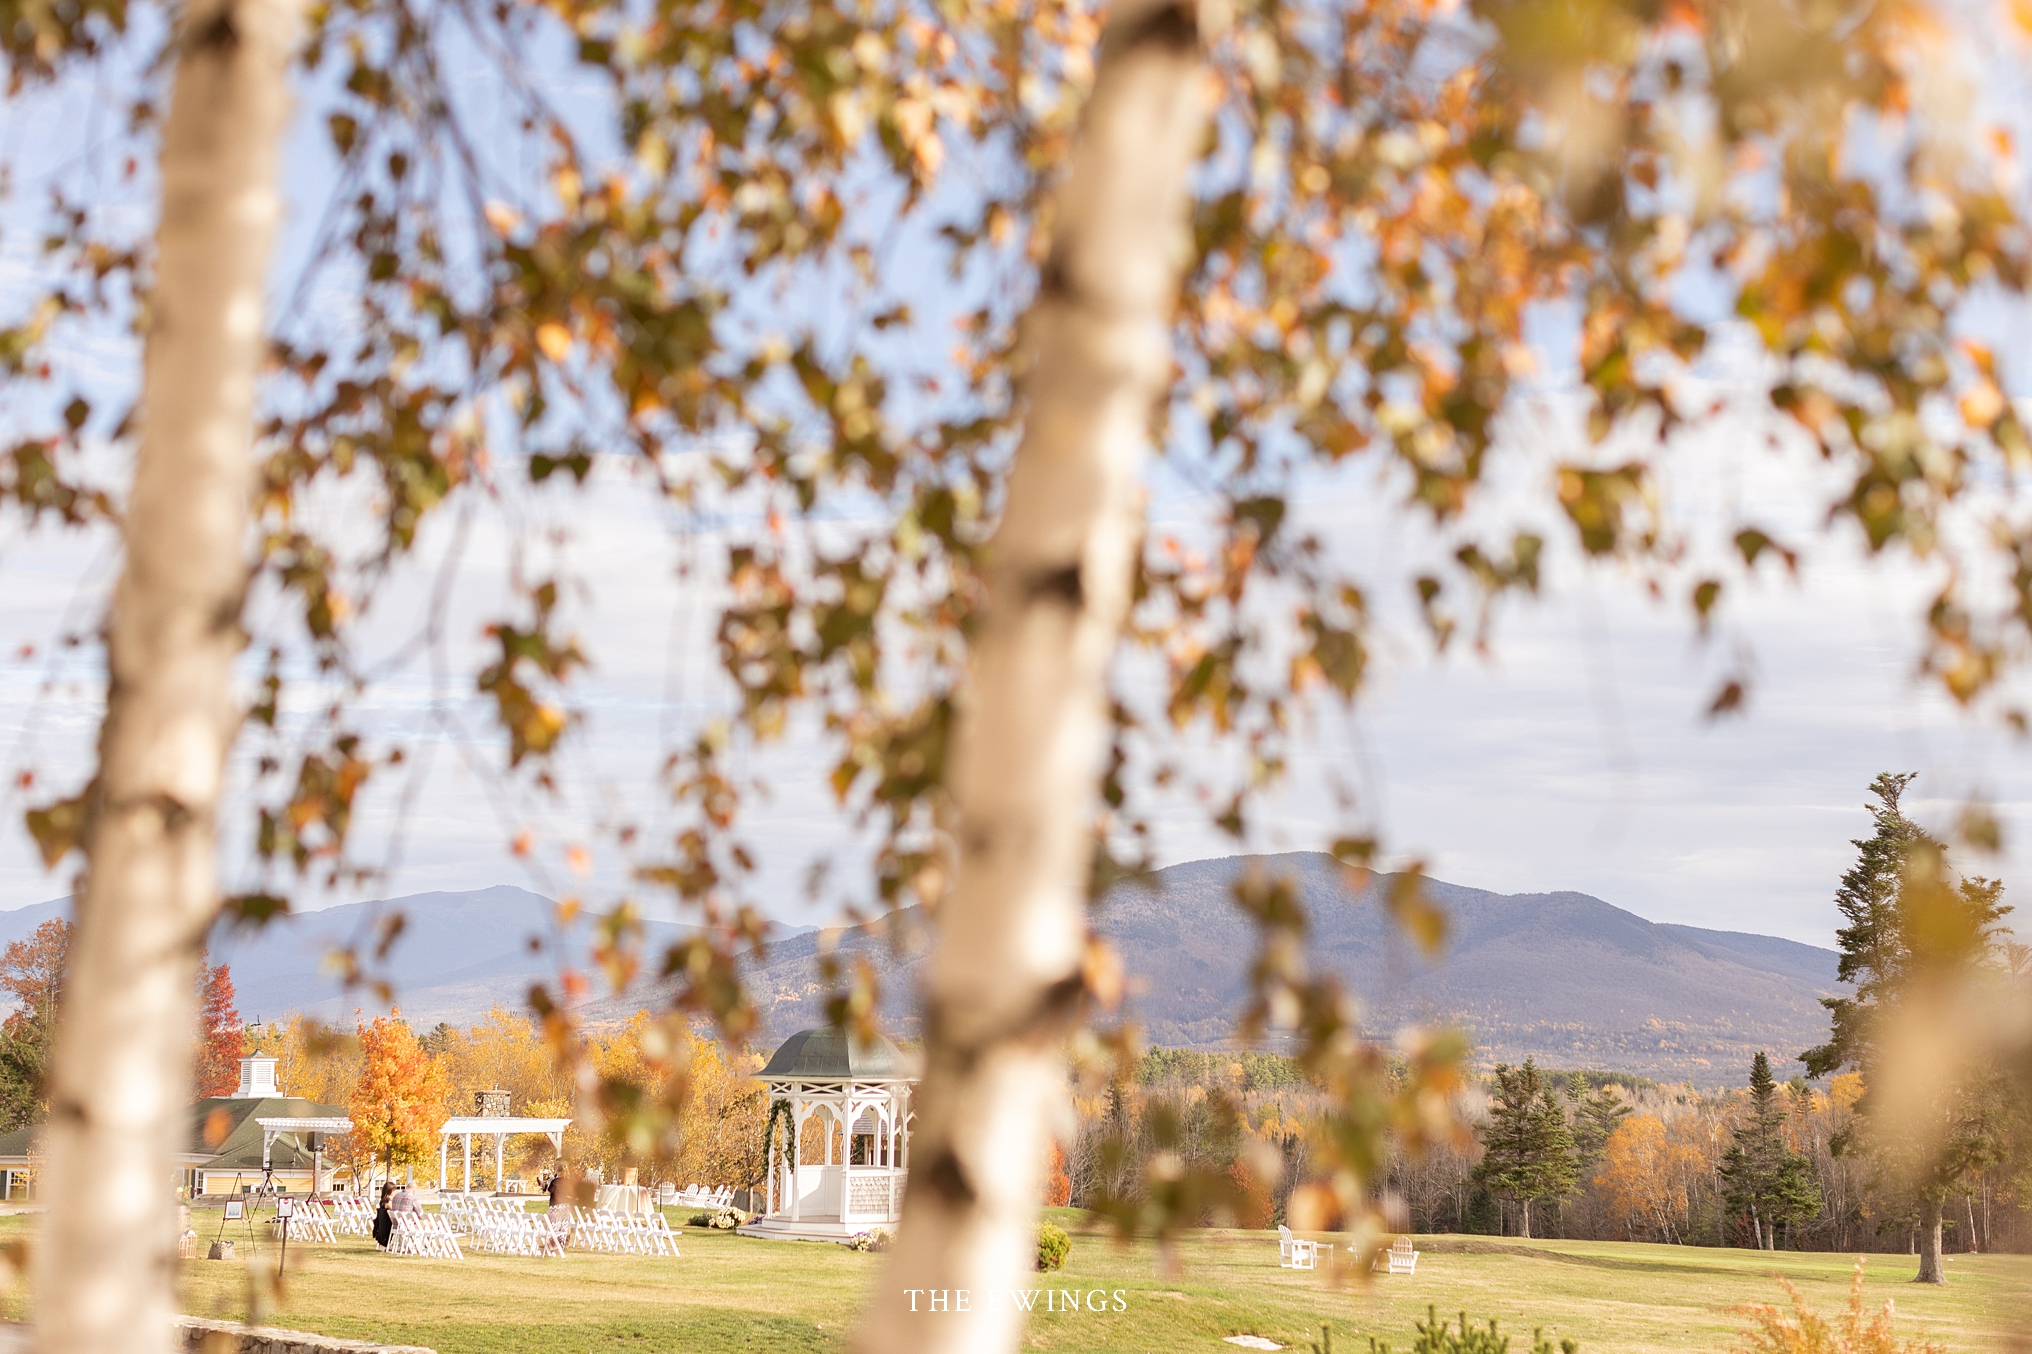 A white mountains wedding venue with epic mountain views and outdoor ceremony space.